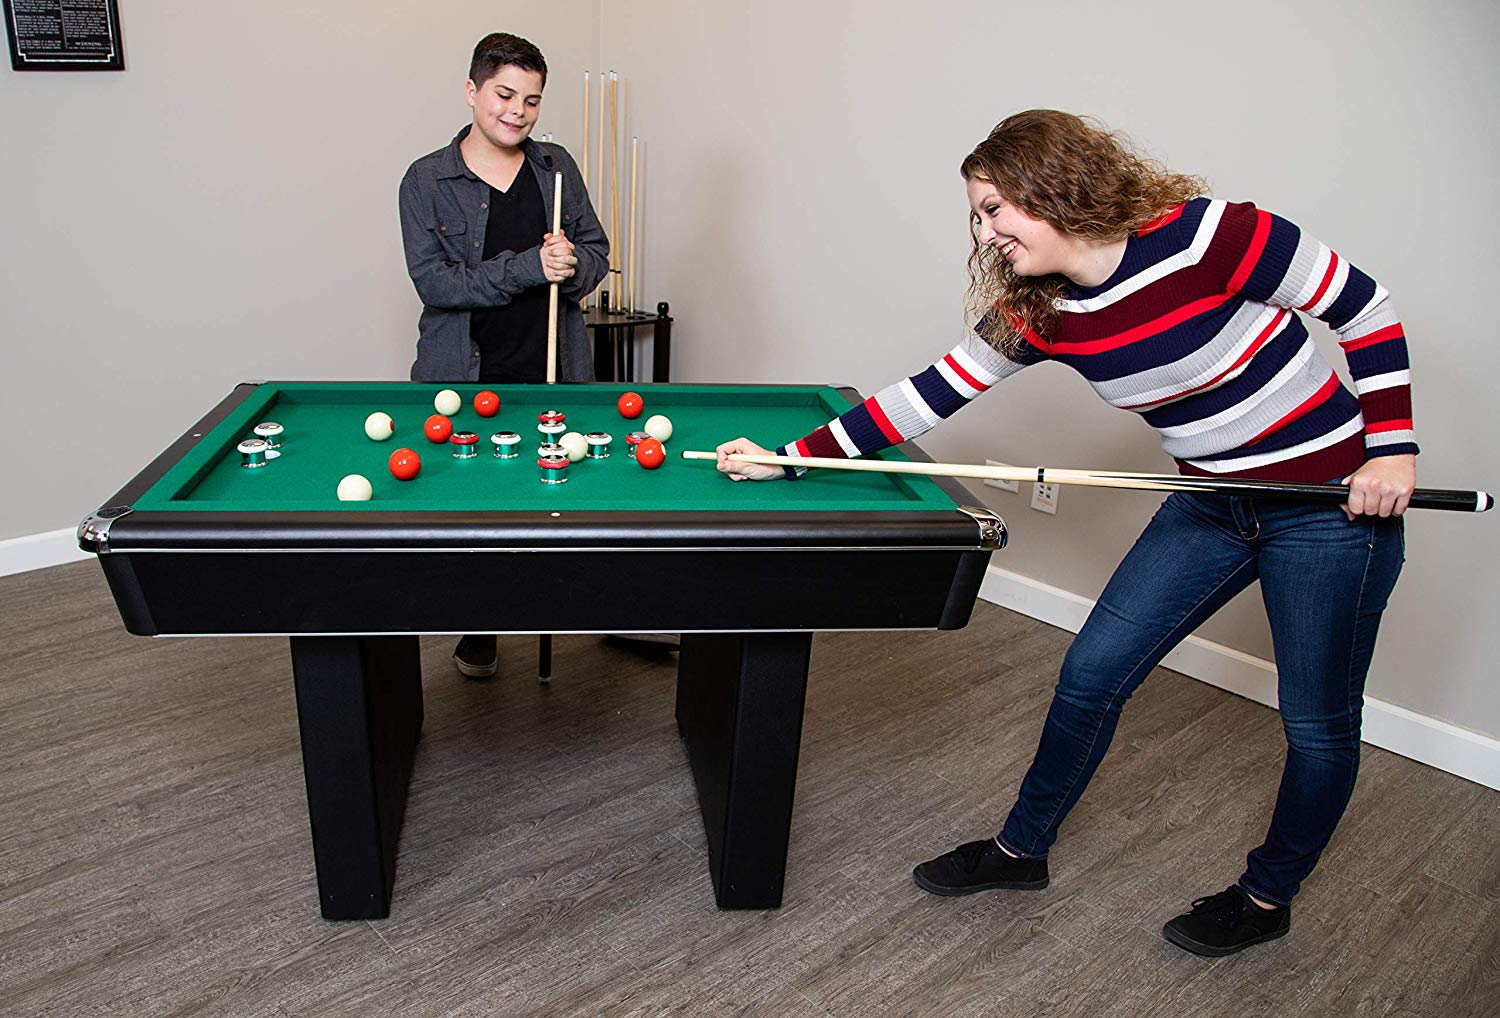 Best Bumper Pool Table: Reviews, Strategy, Buying Guide, and FAQs 2021